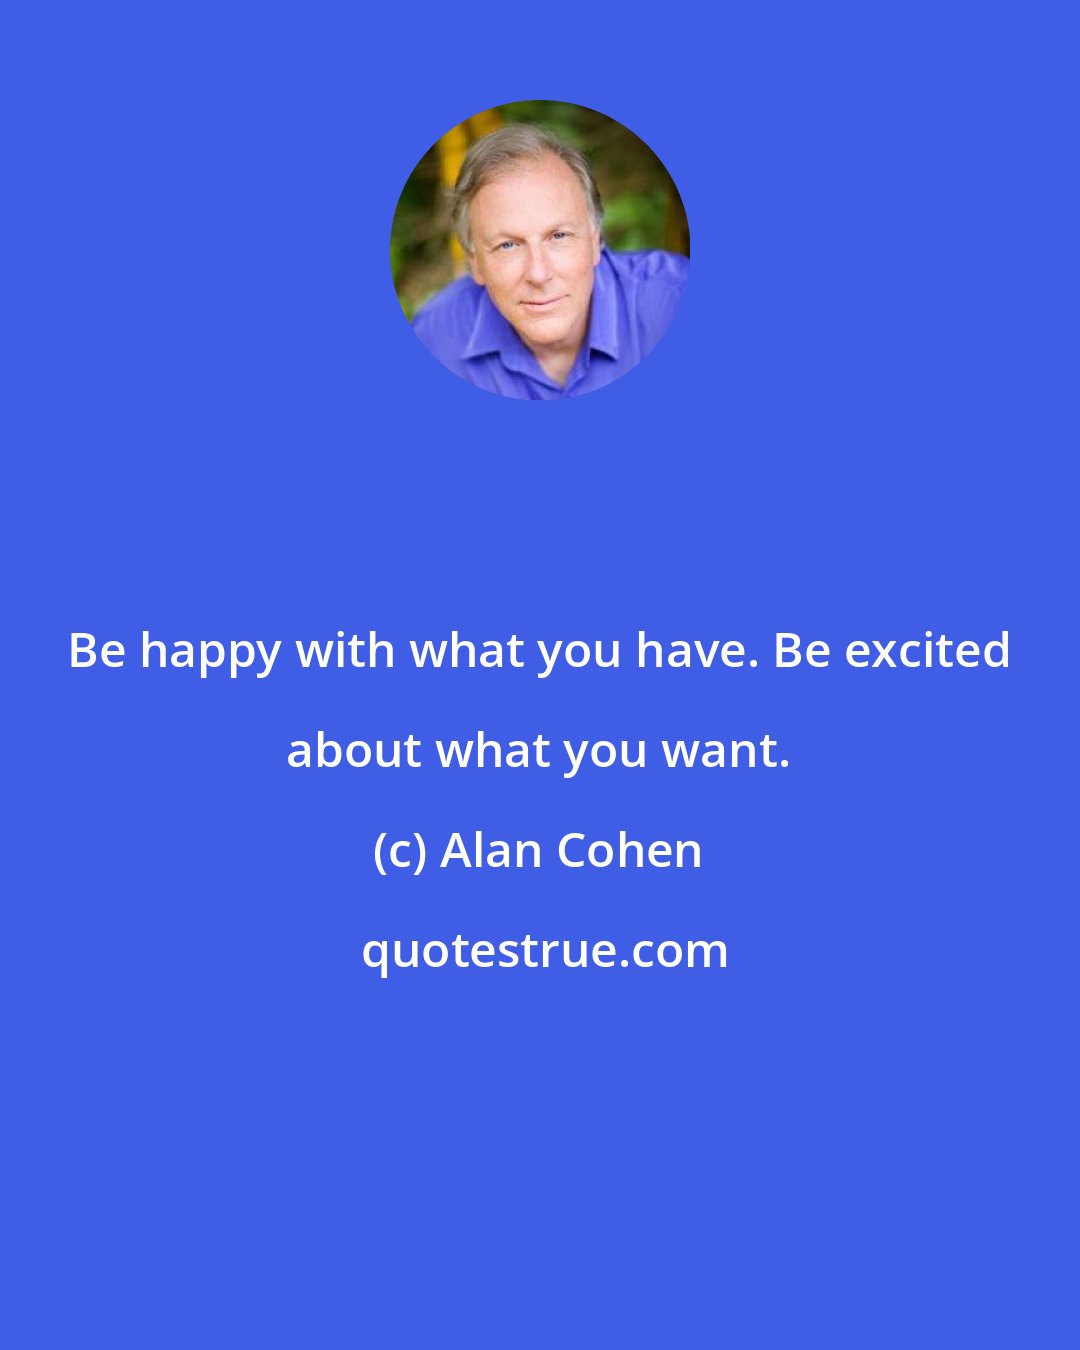 Alan Cohen: Be happy with what you have. Be excited about what you want.